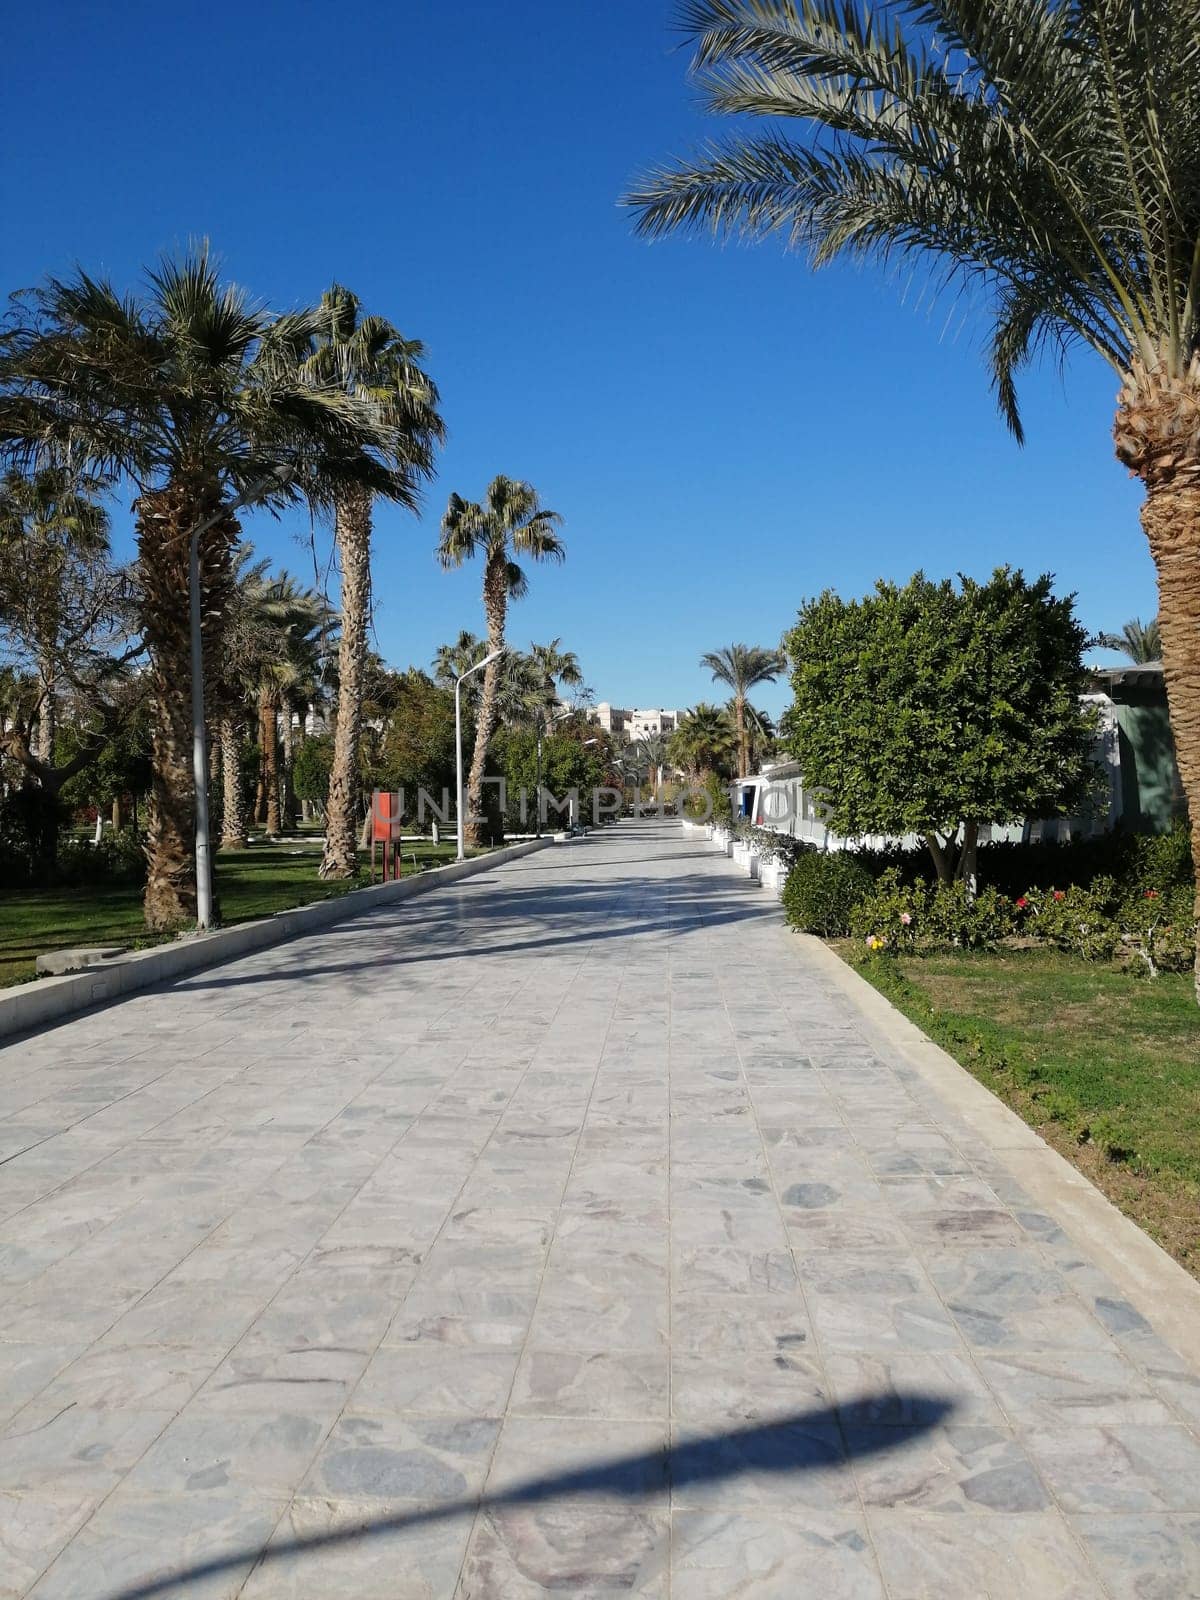 The view of palm trees and beautiful architecture on the territory of the castle in Egypt is the concept of a luxury trip. Rest on the territory of the hotel. by Annu1tochka